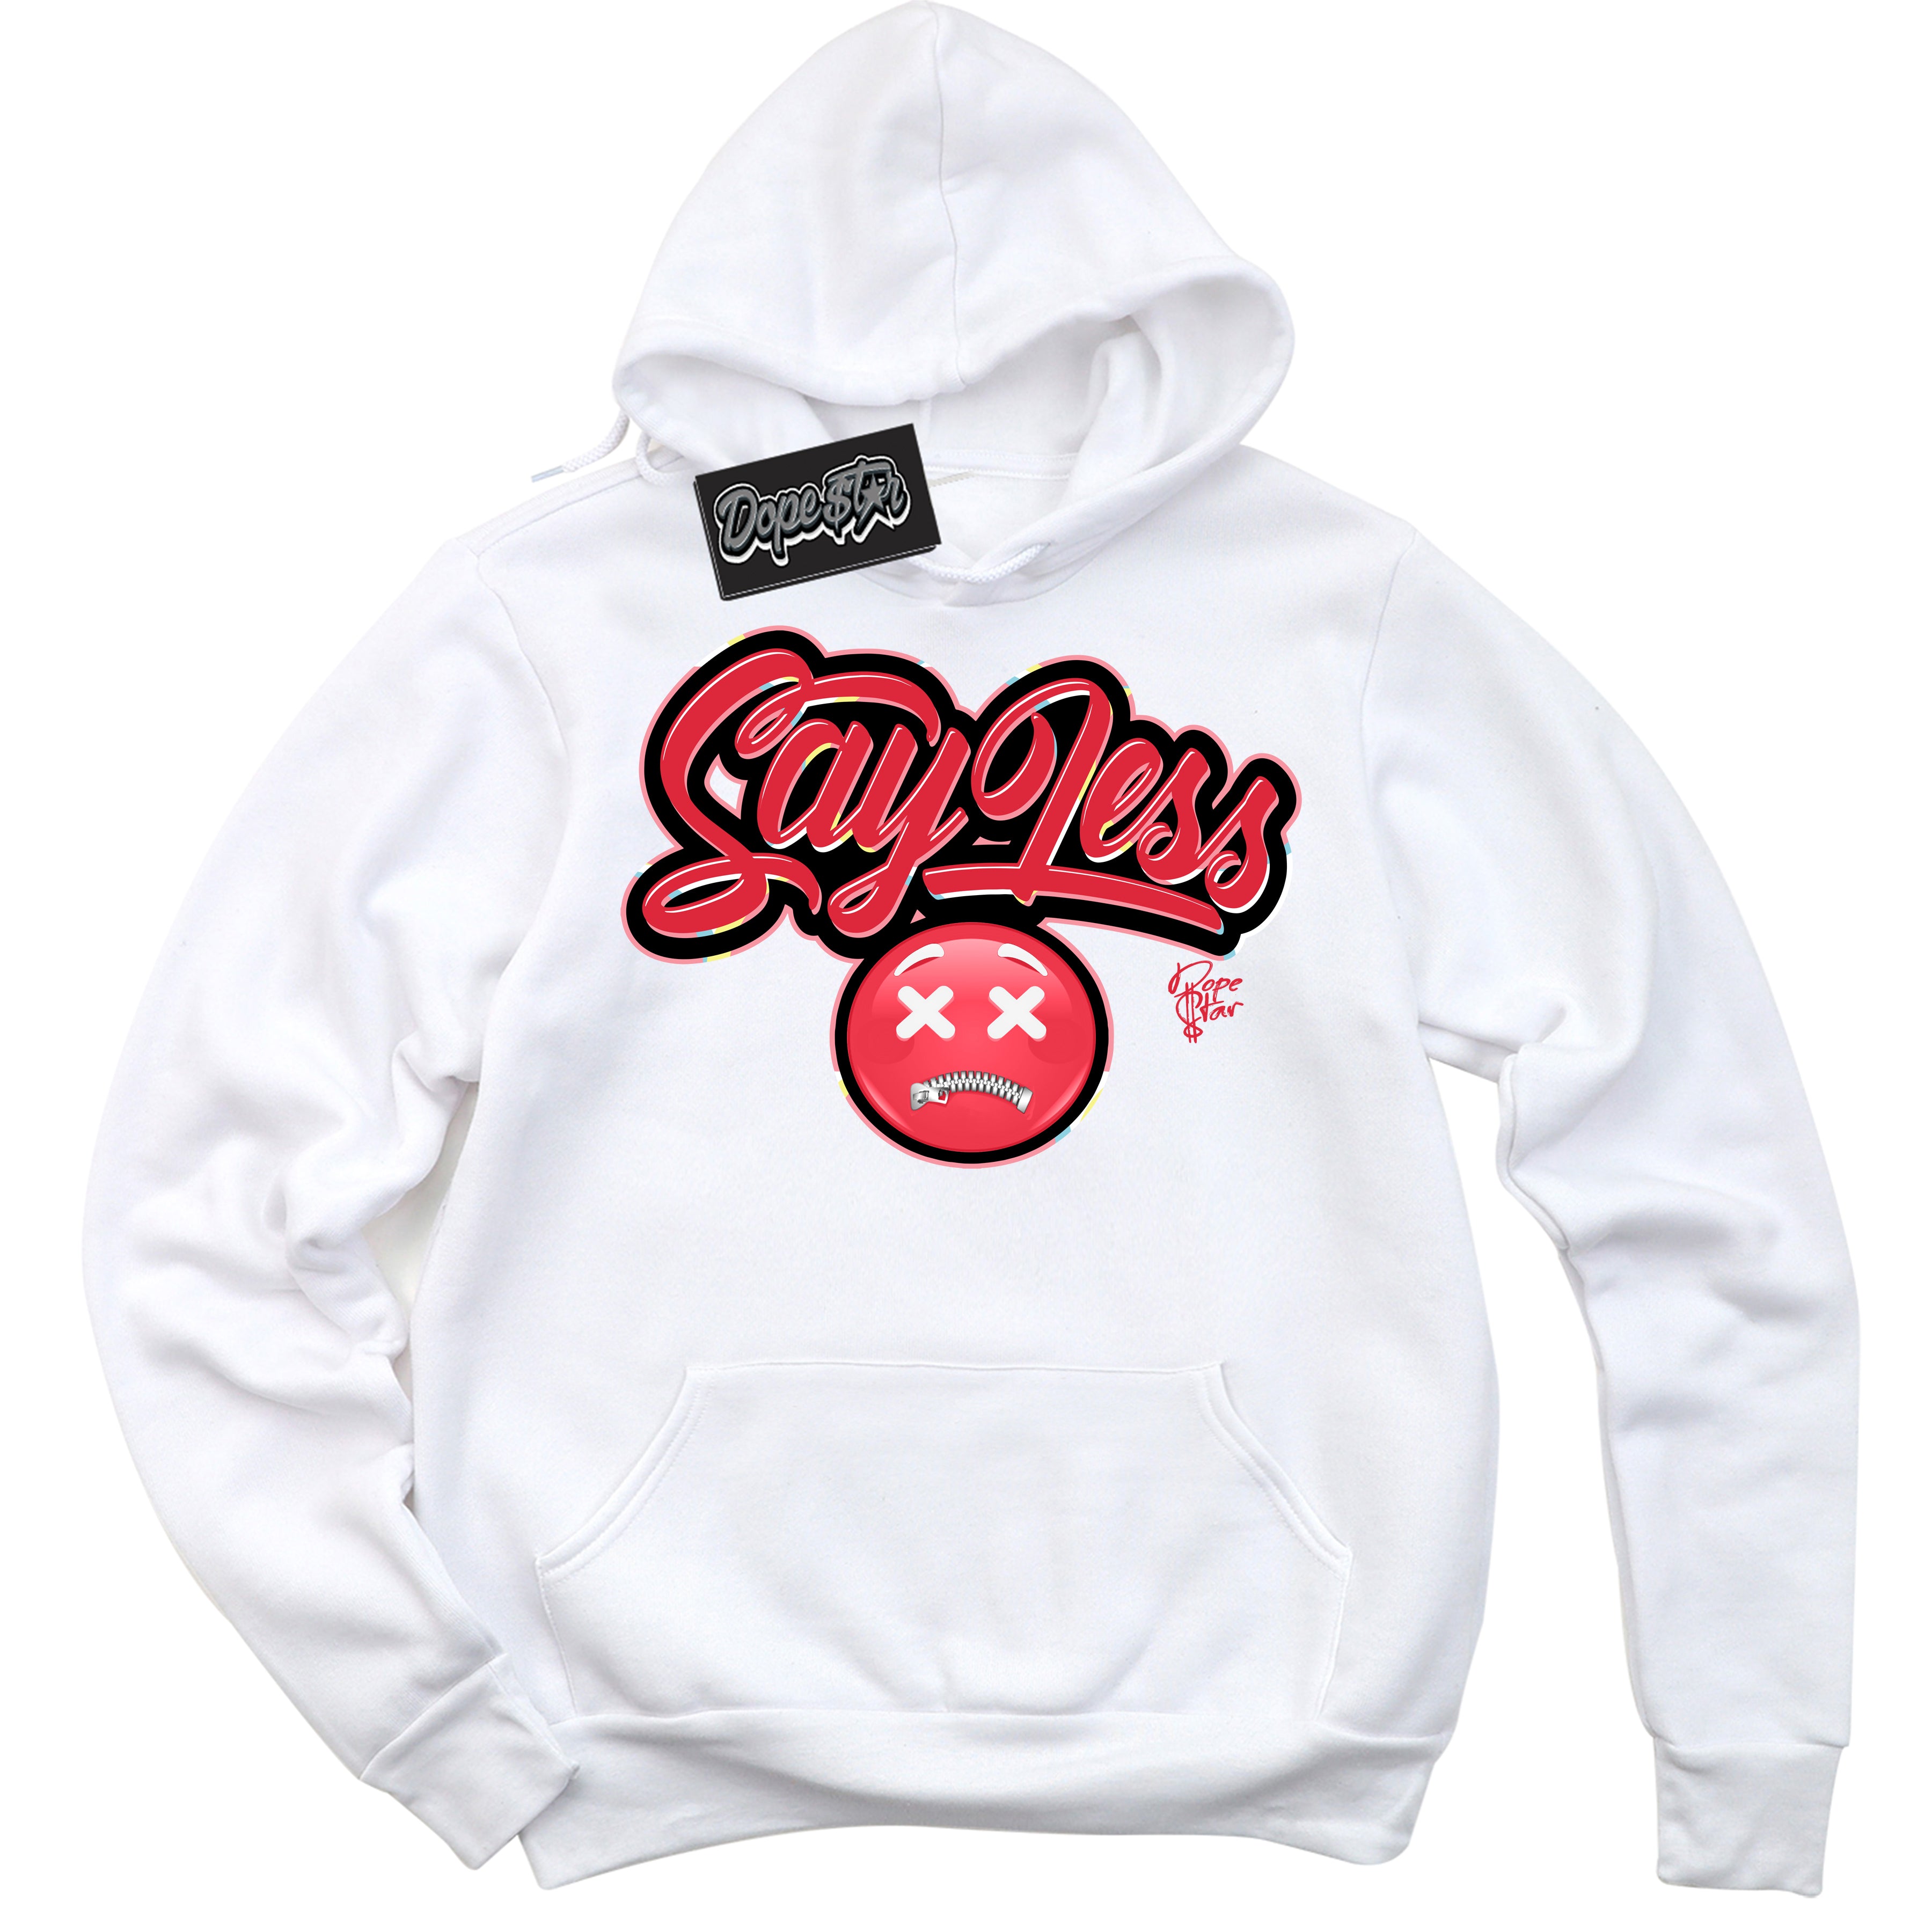 Cool White Graphic DopeStar Hoodie with “ Say Less “ print, that perfectly matches Spider-Verse 1s sneakers